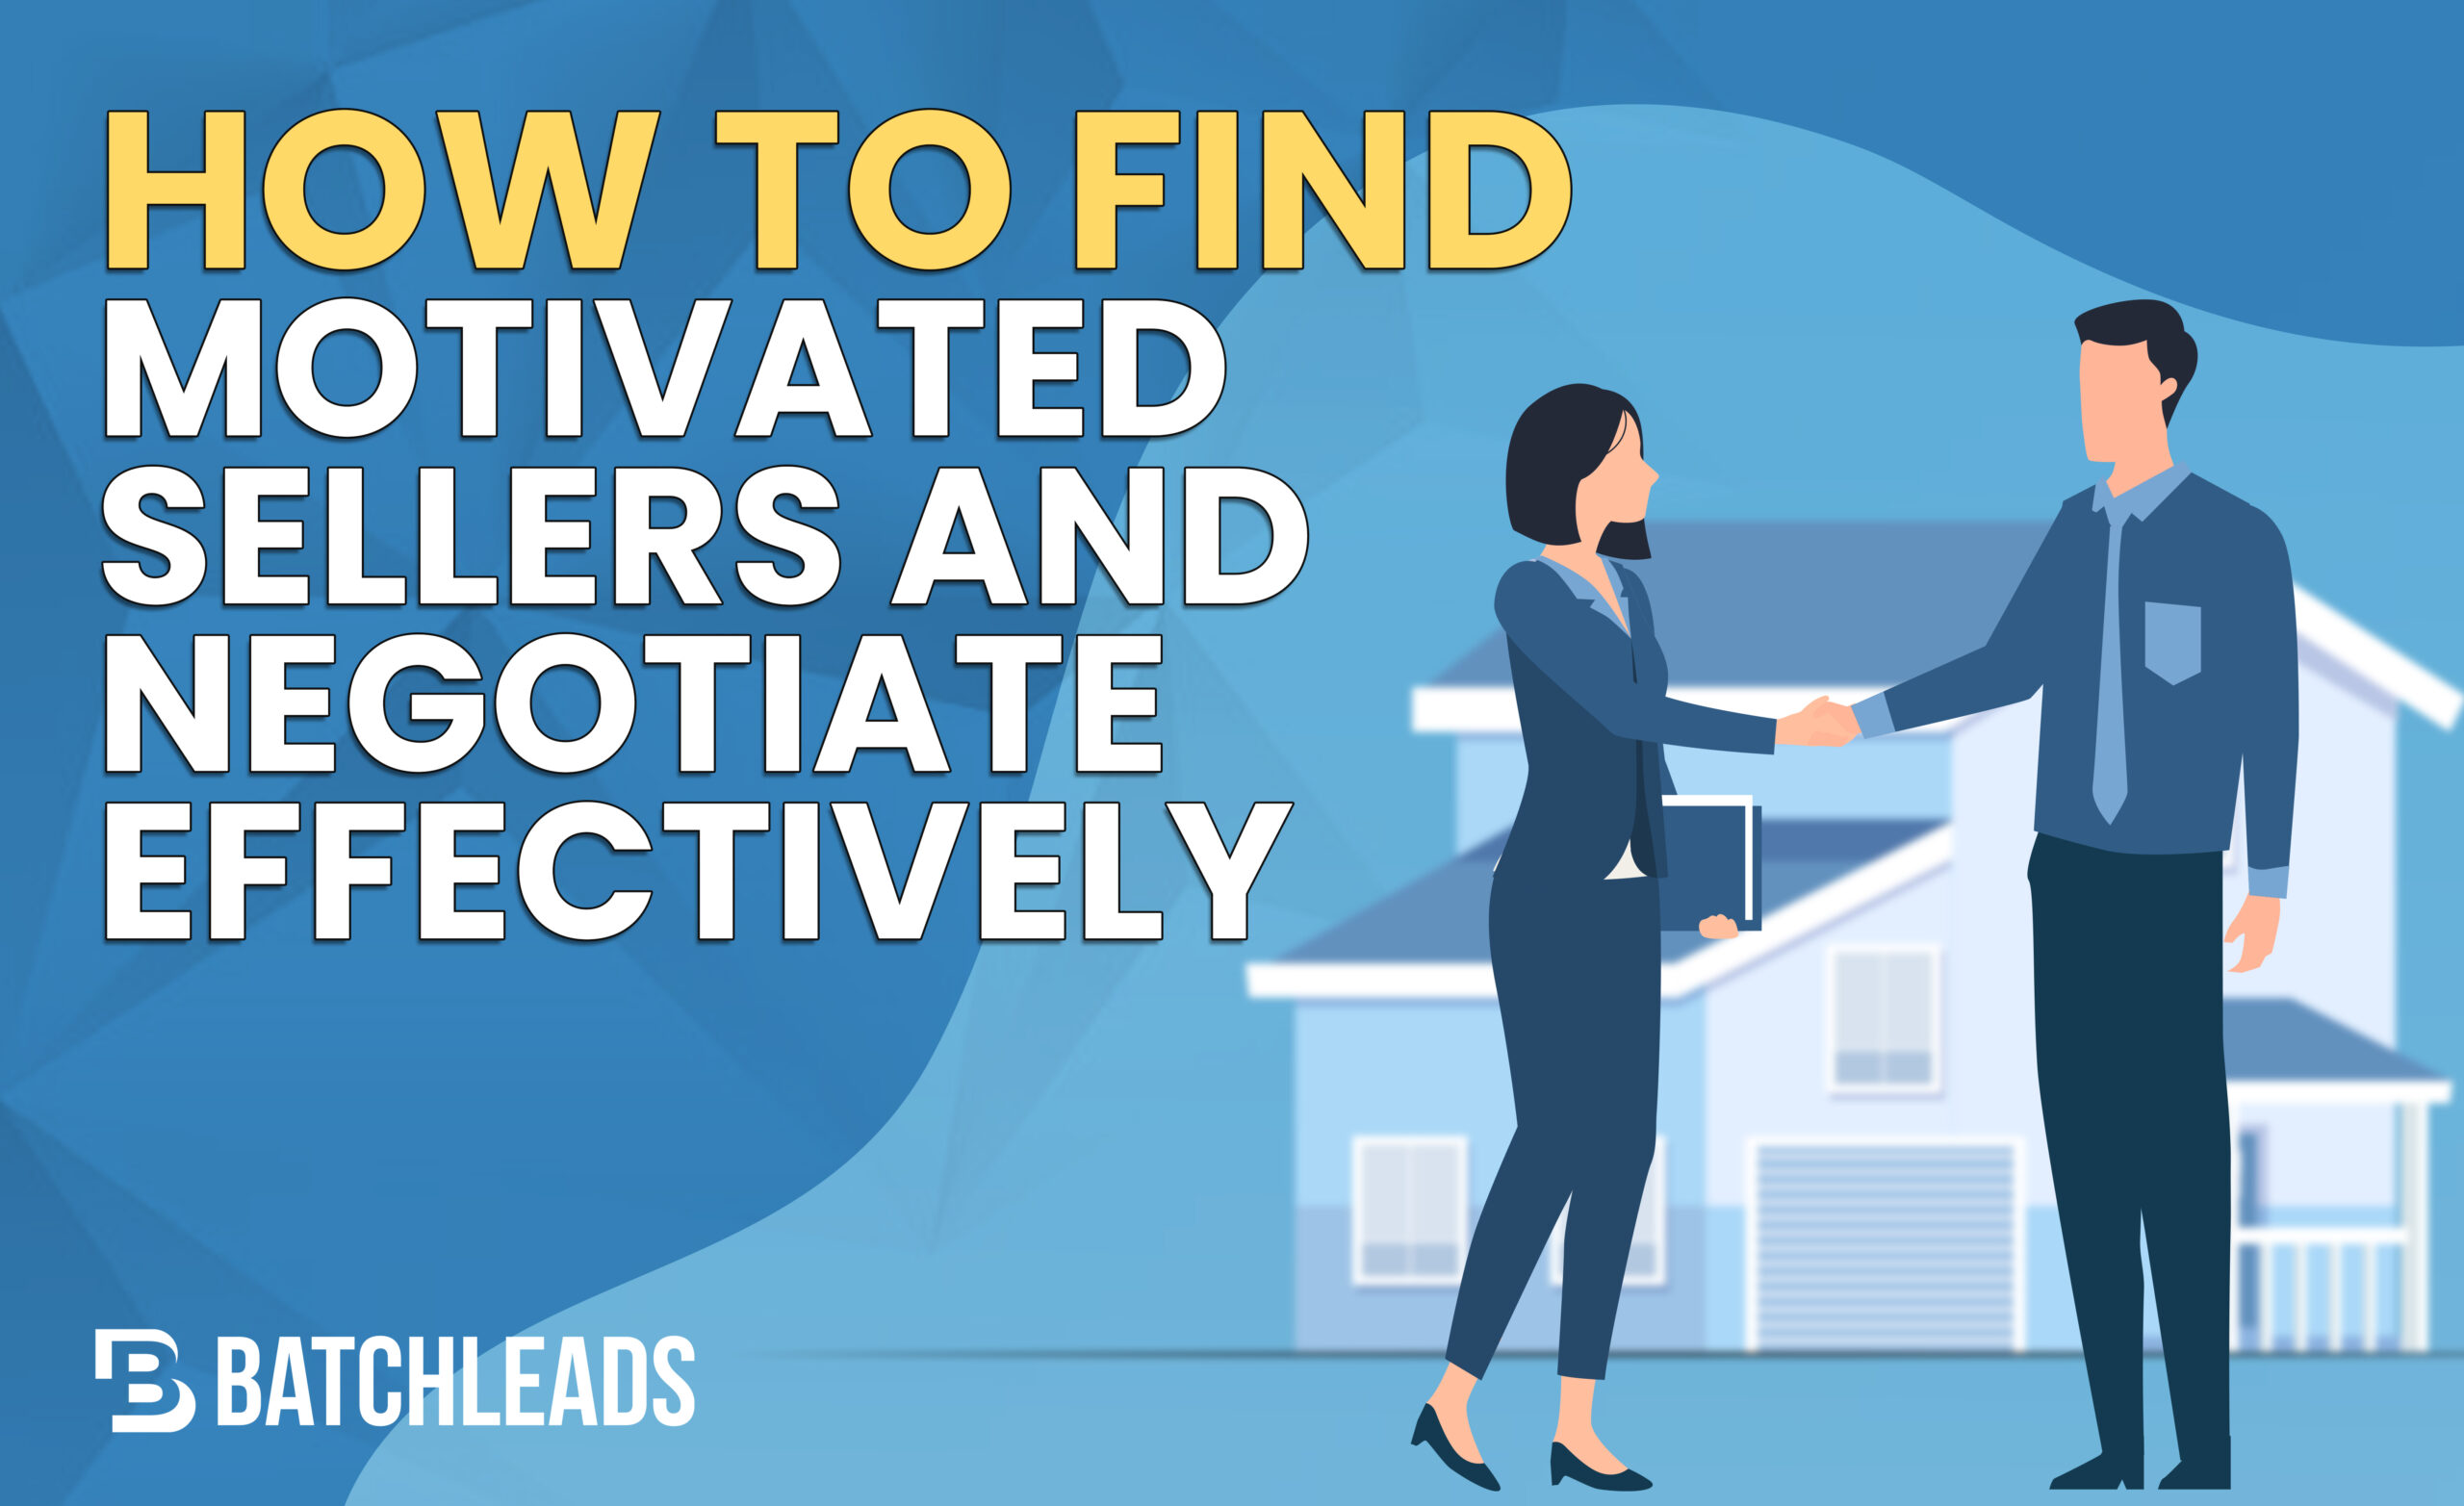 How To Find & Negotiate With Motivated Sellers in Real Estate v2